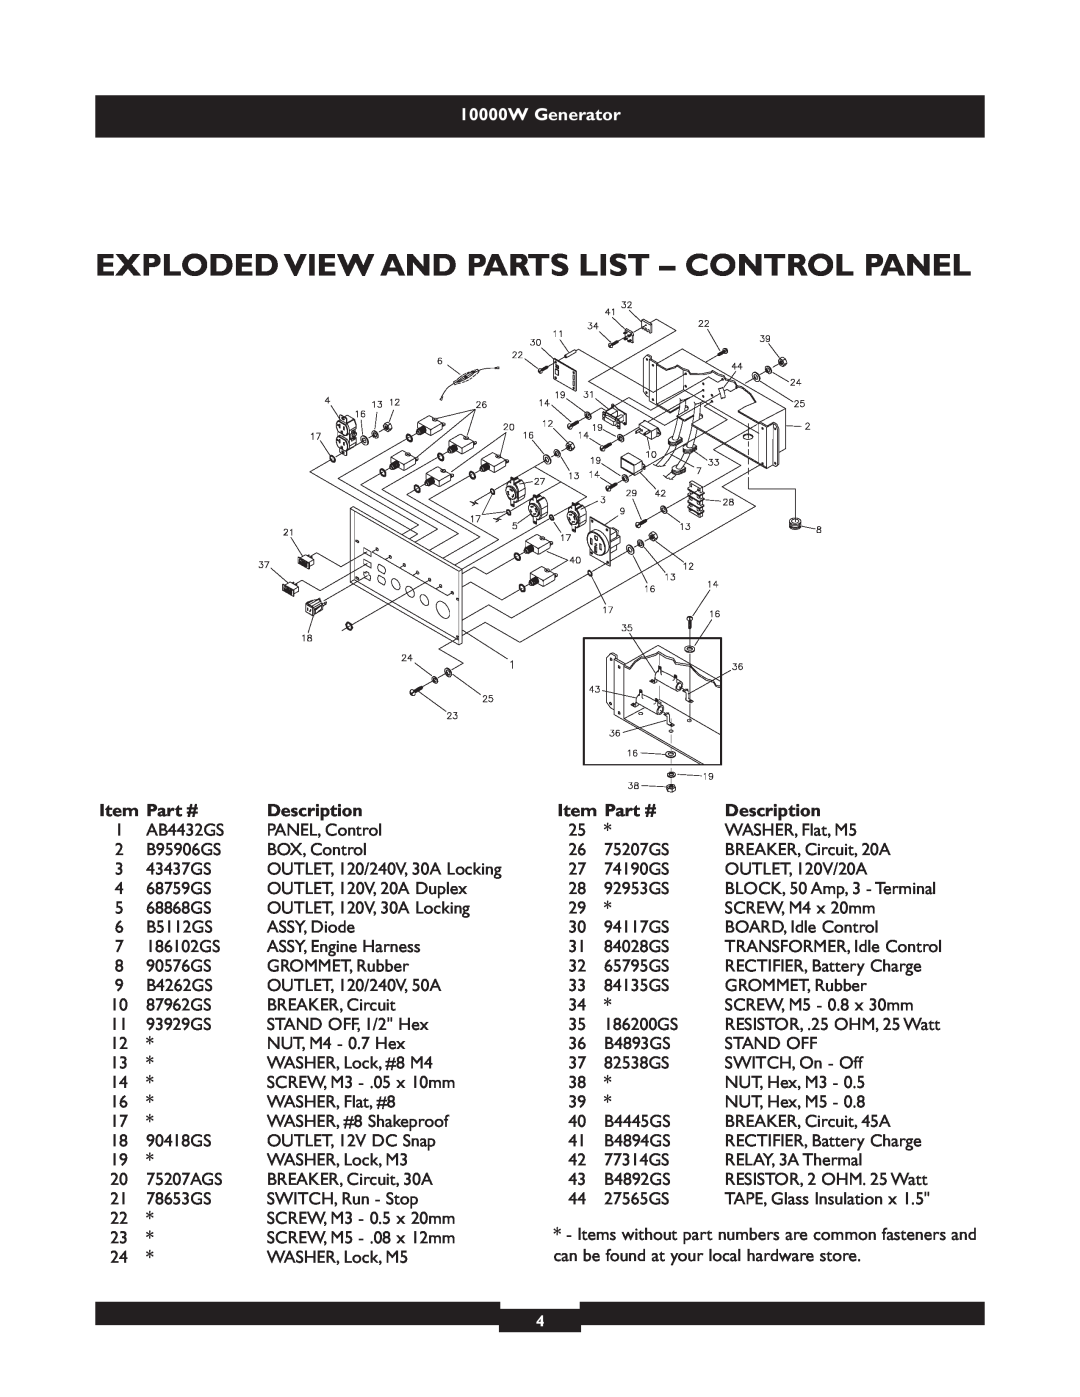 Briggs & Stratton 9801 manual Exploded View And Parts List - Control Panel, 10000W Generator, Description 